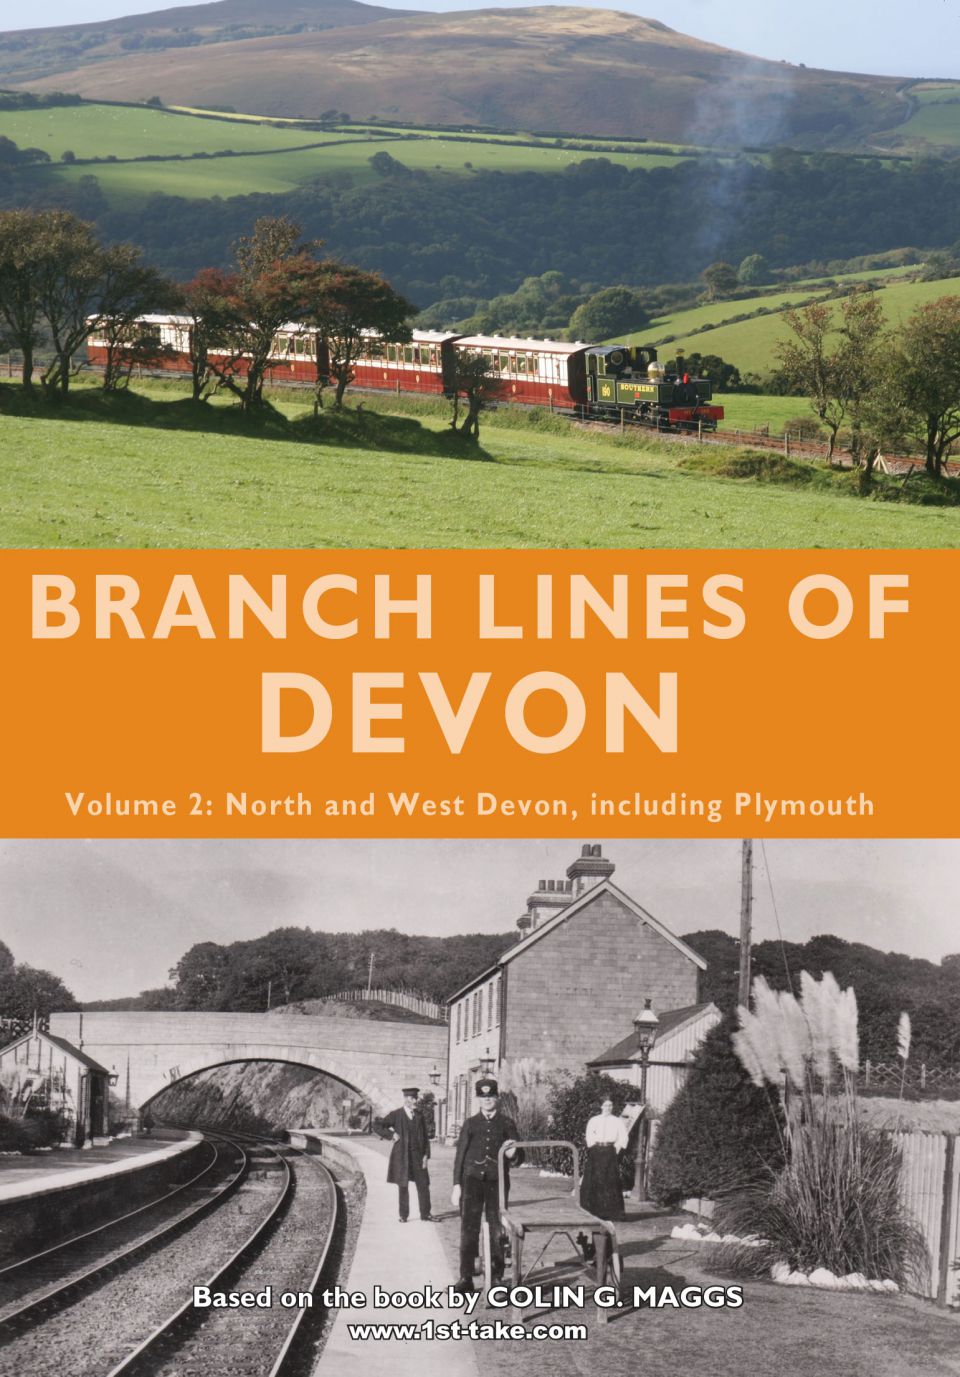 Branch Lines of Devon Vol.2: North and West Devon, including Plymouth